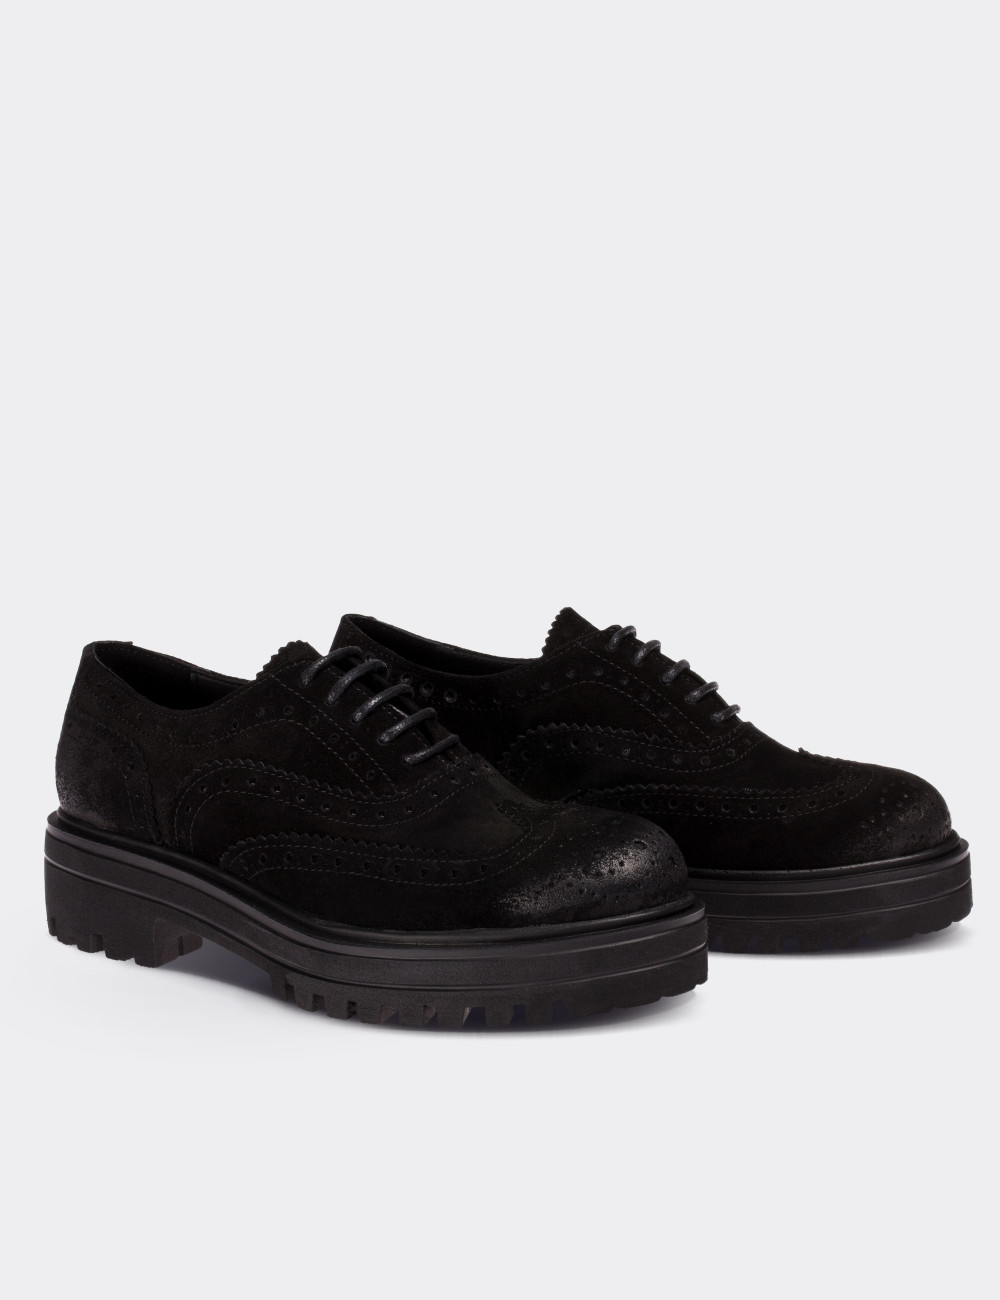 Black Suede Leather Lace-up Shoes - 01418ZSYHE04